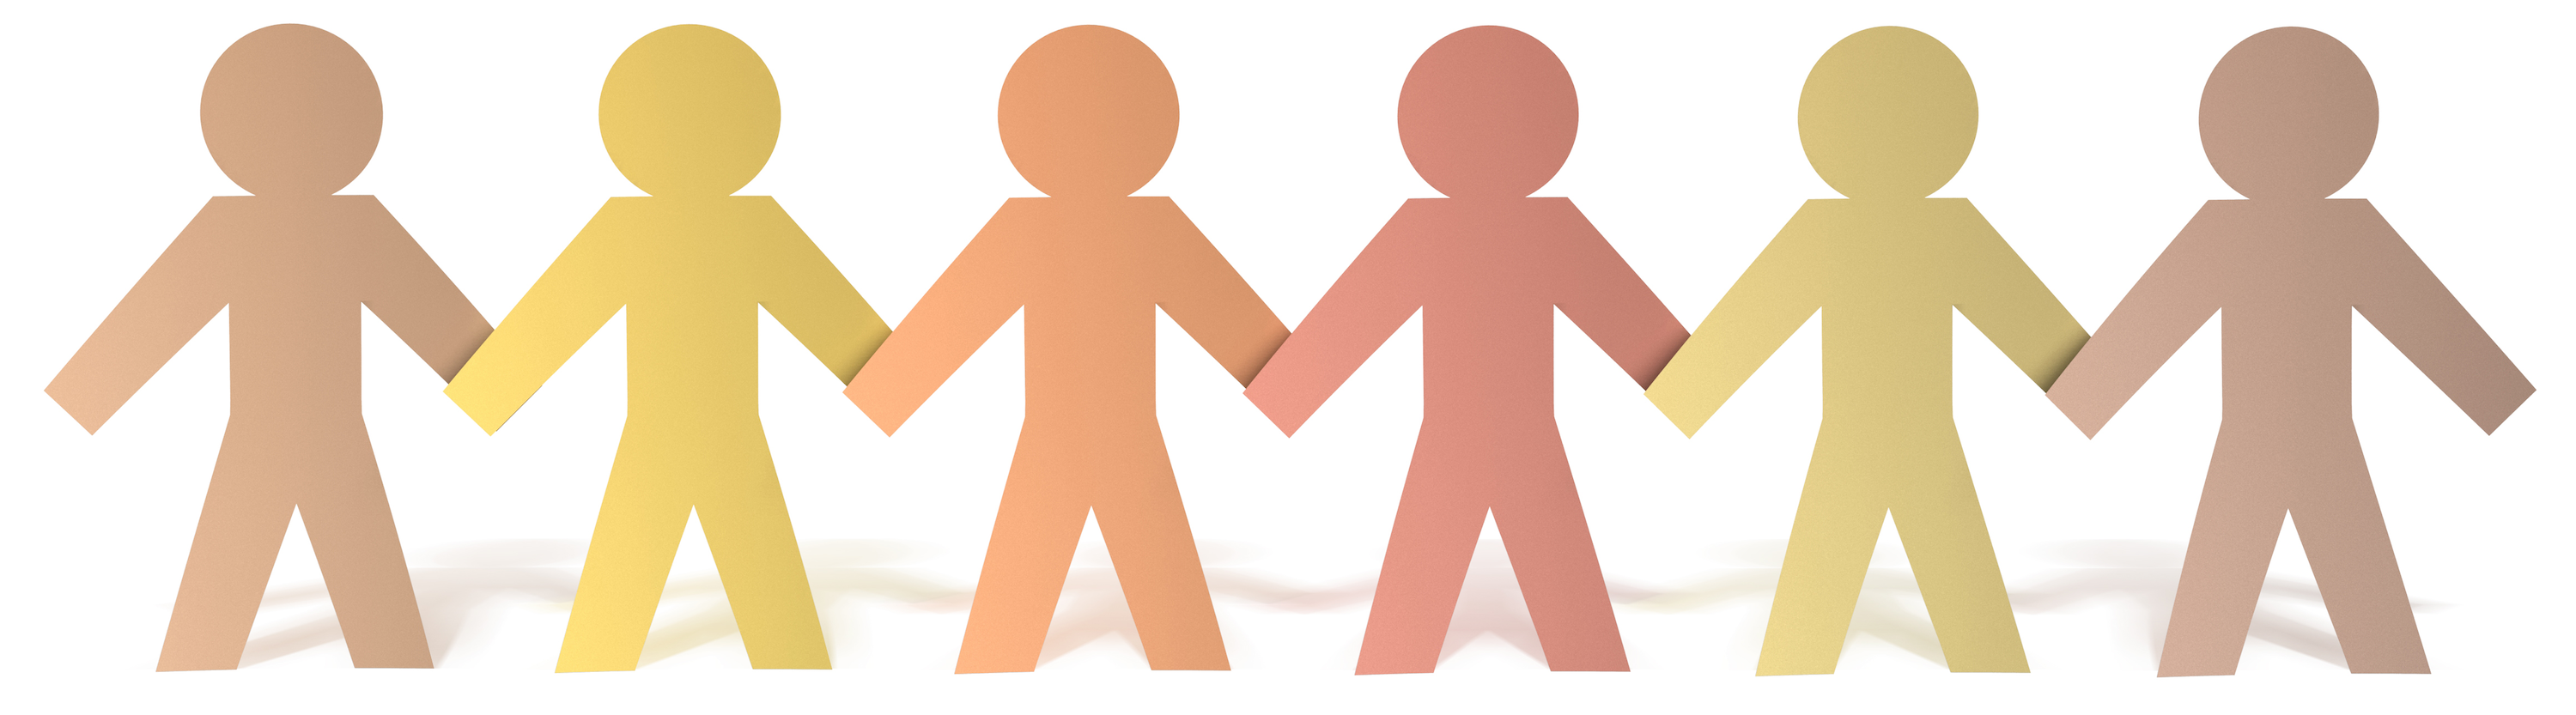 Holding Hands PNG HD - 129957